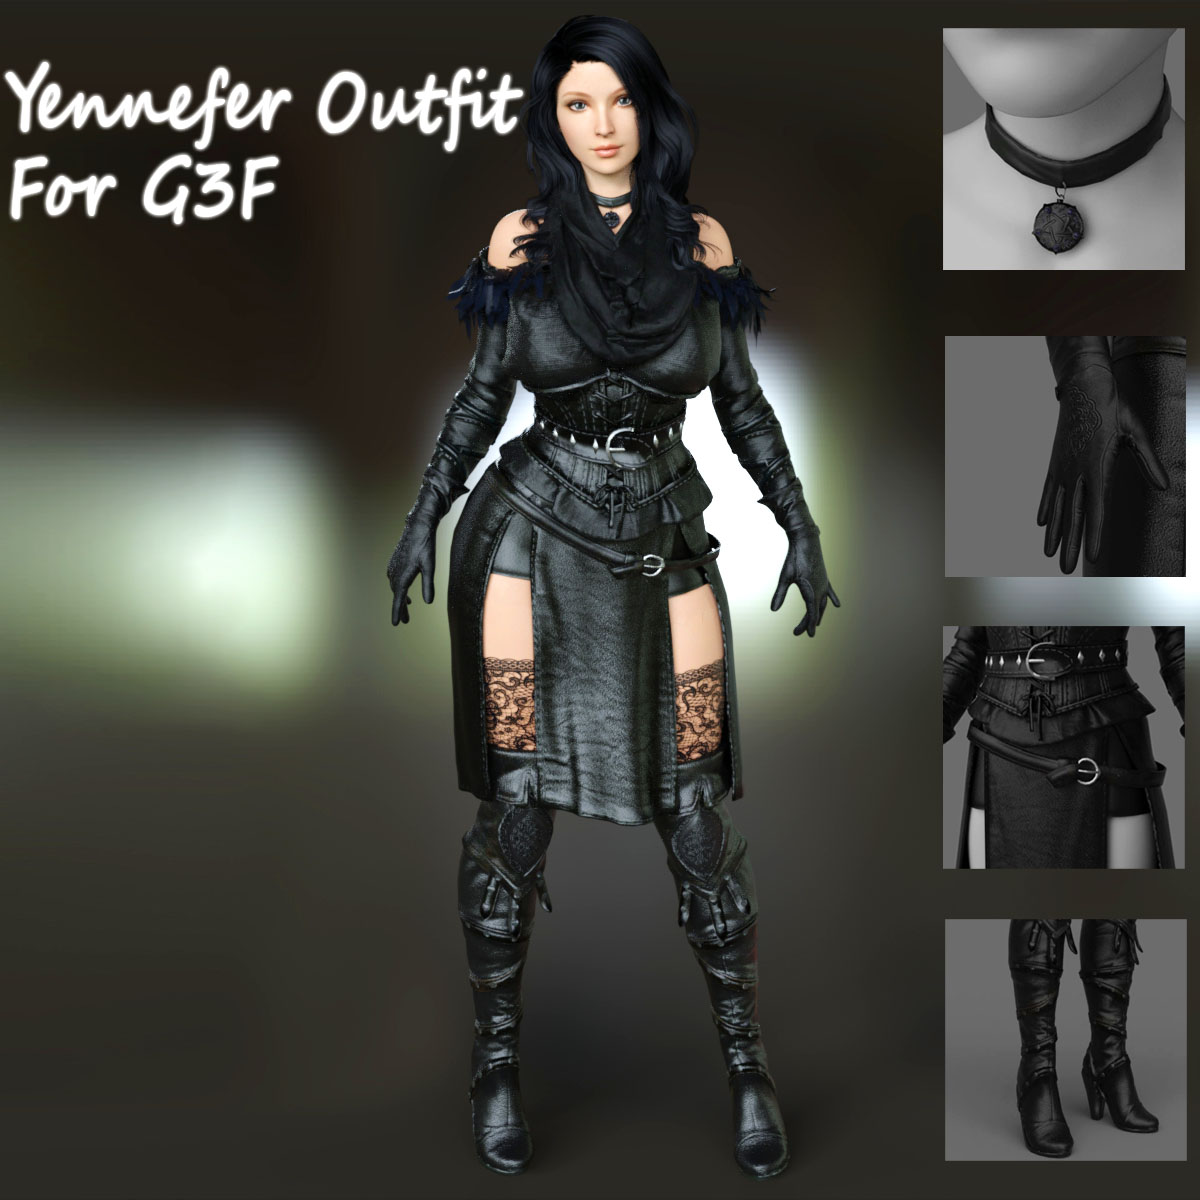 Yennefer Outfit For G3F